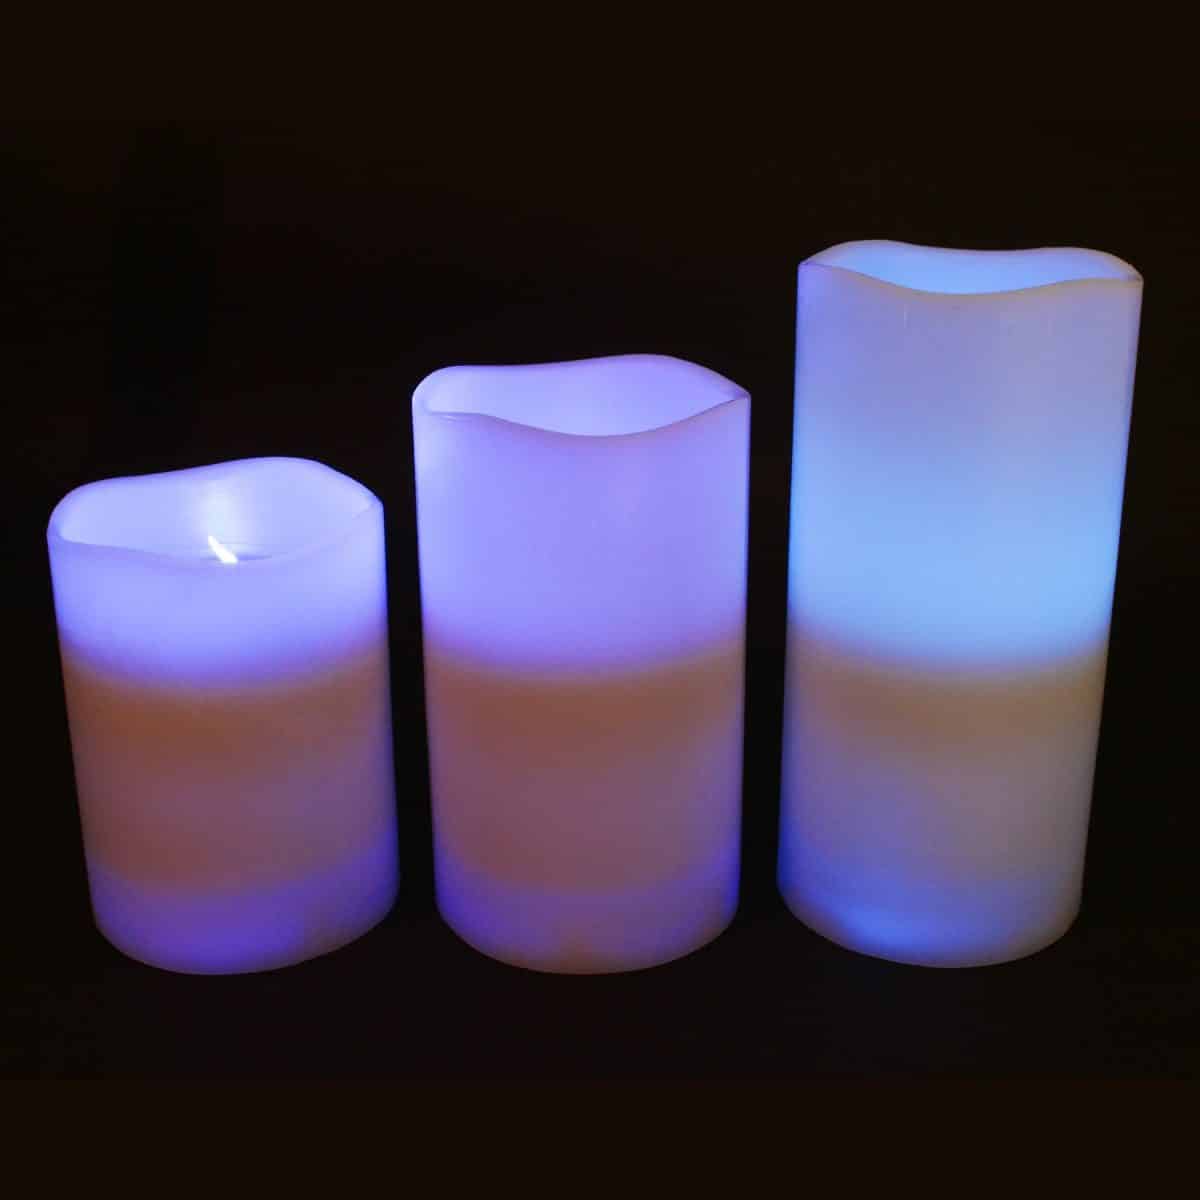 LED Vanilla Scented Candle Set with 18 Key Remote and Timer